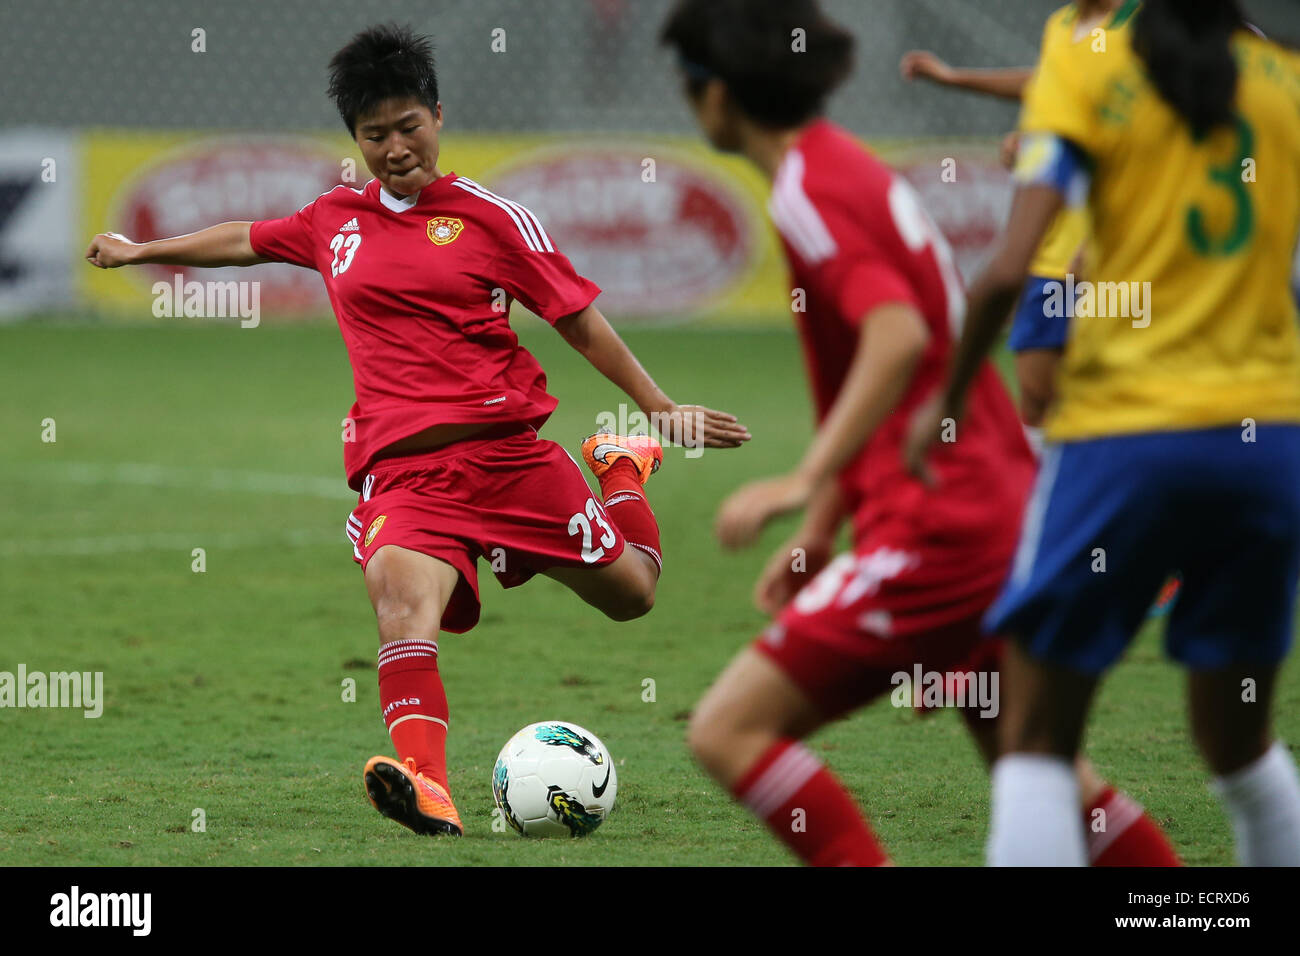 Brasilia, Brazil. 18th Dec, 2014. China's Ren Guixin (1st L) shoots during a match between China and Brazil of the 2014 International Tournament of Brasilia in Brasilia, capital of Brazil, Dec. 18, 2014. Brazil won 4-1. © Xu Zijian/Xinhua/Alamy Live News Stock Photo